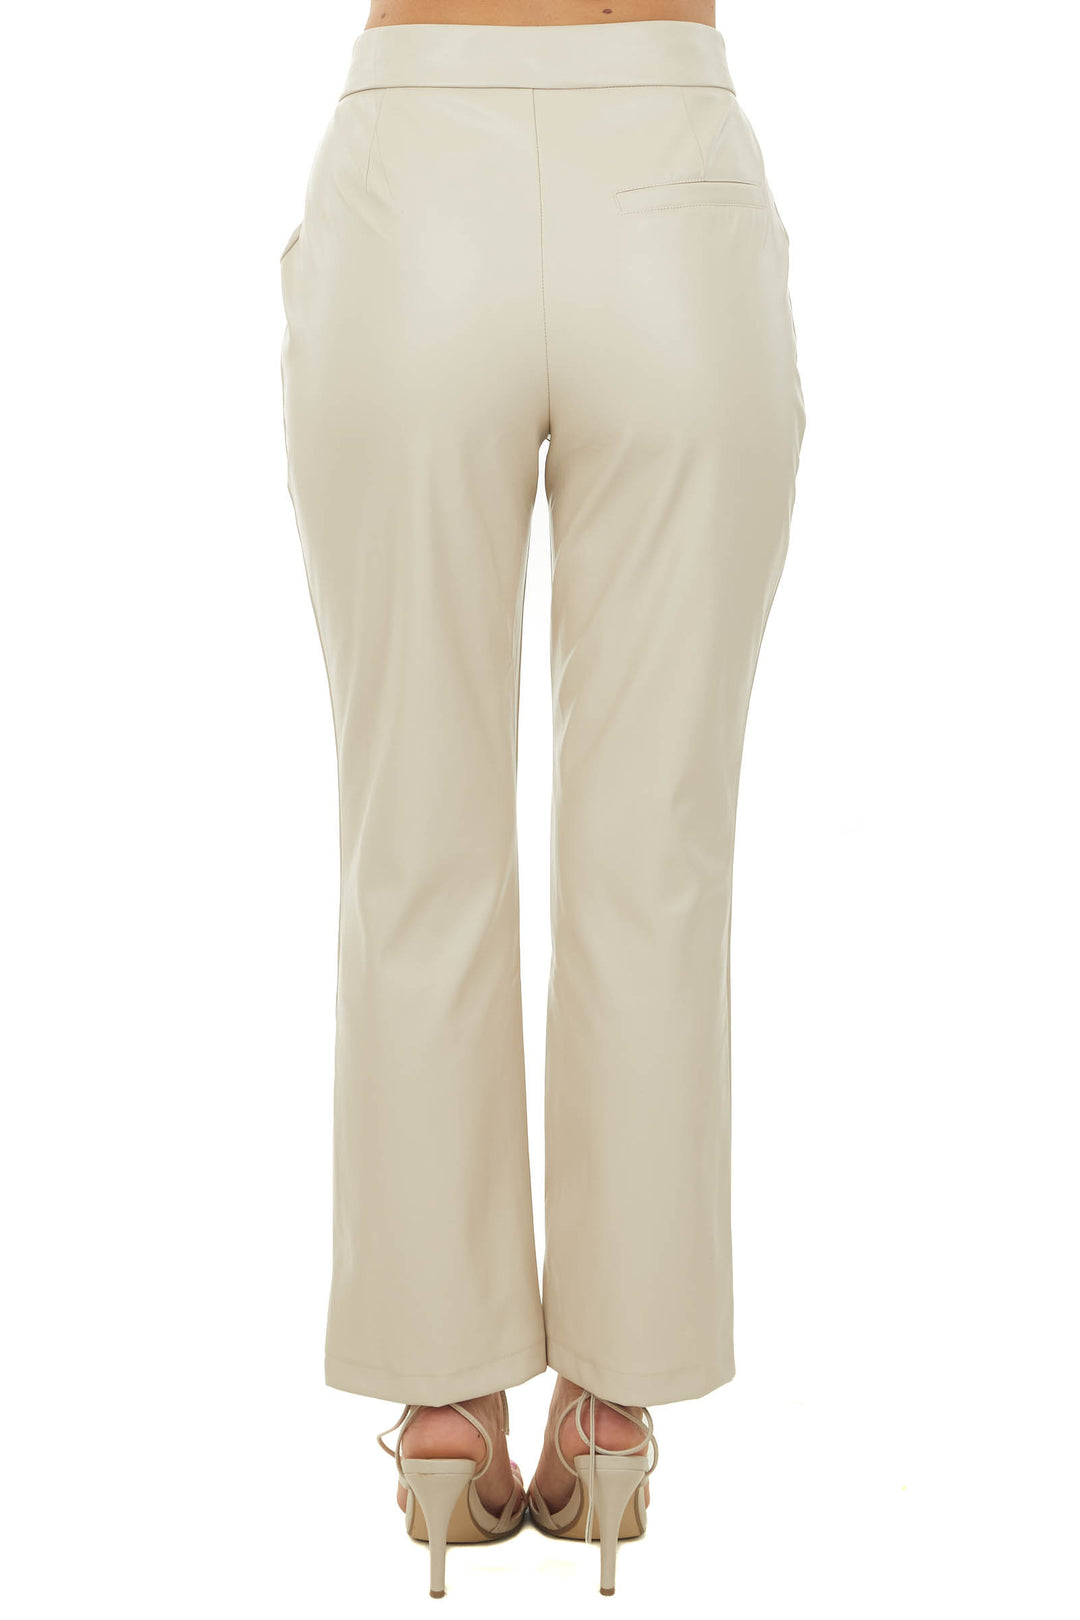 Champagne Faux Leather Pants with Slight Flare & Lime Lush